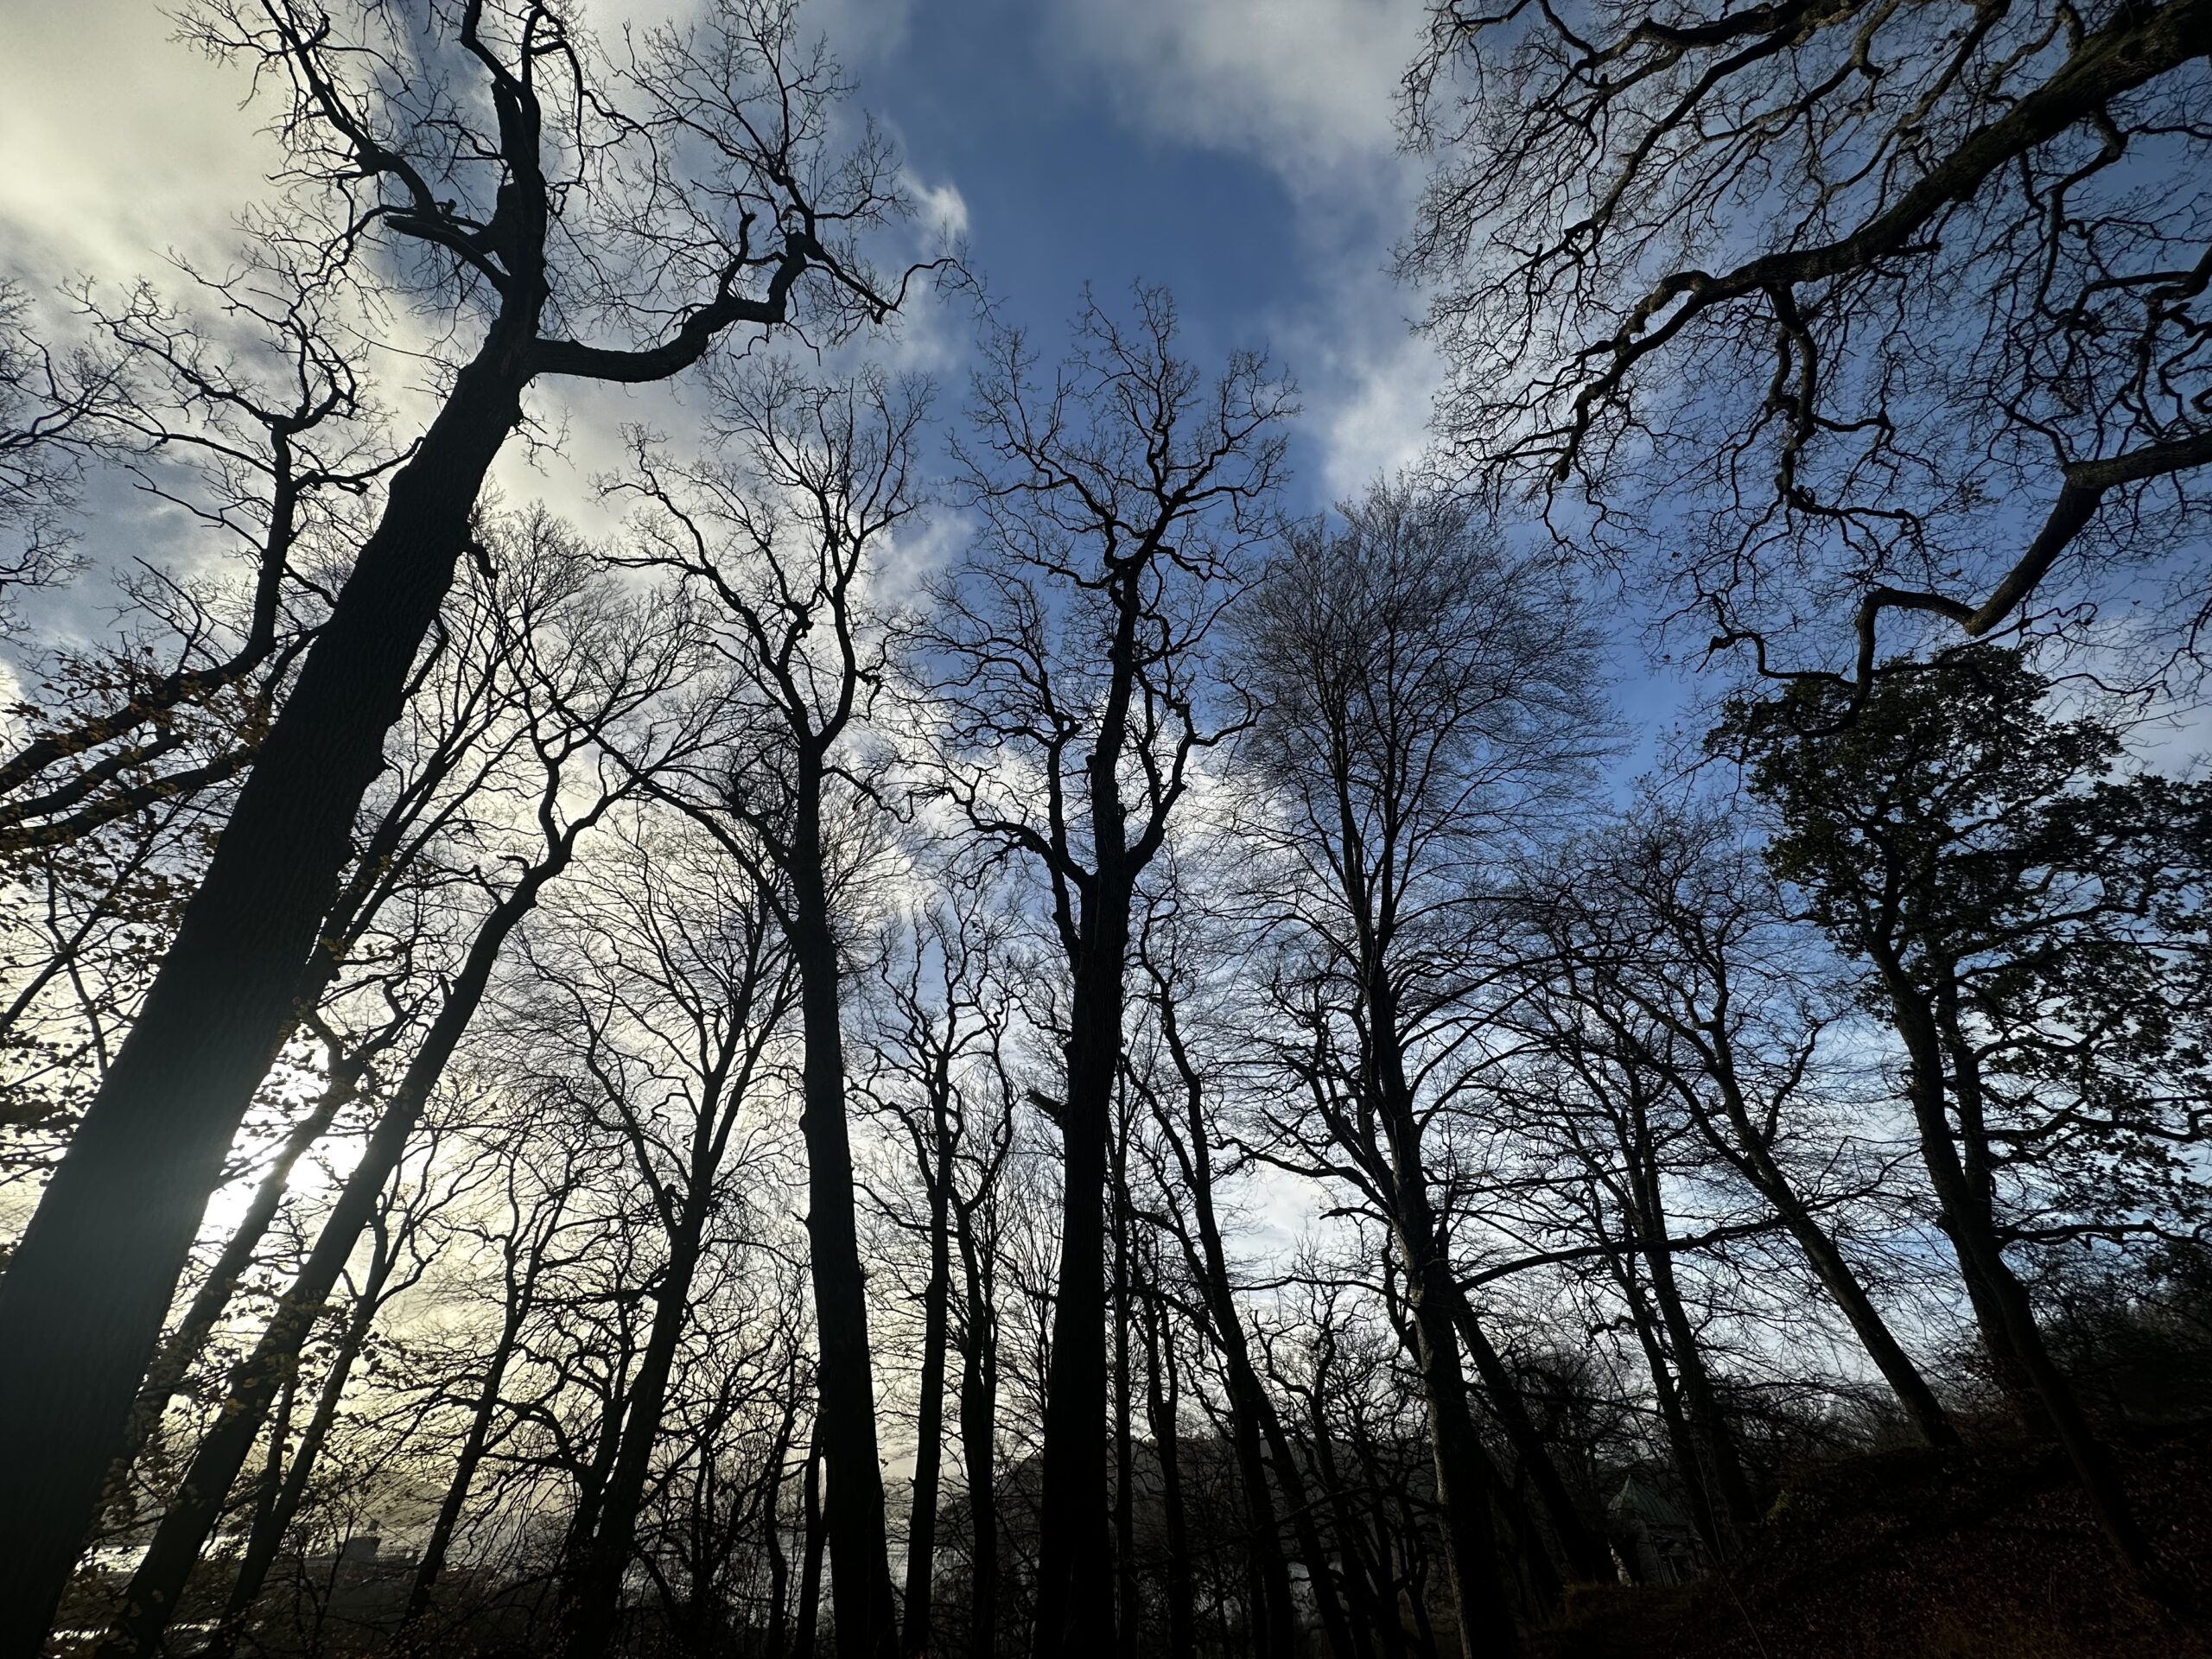 blue sky with light clouds above naked treetops in silhouette